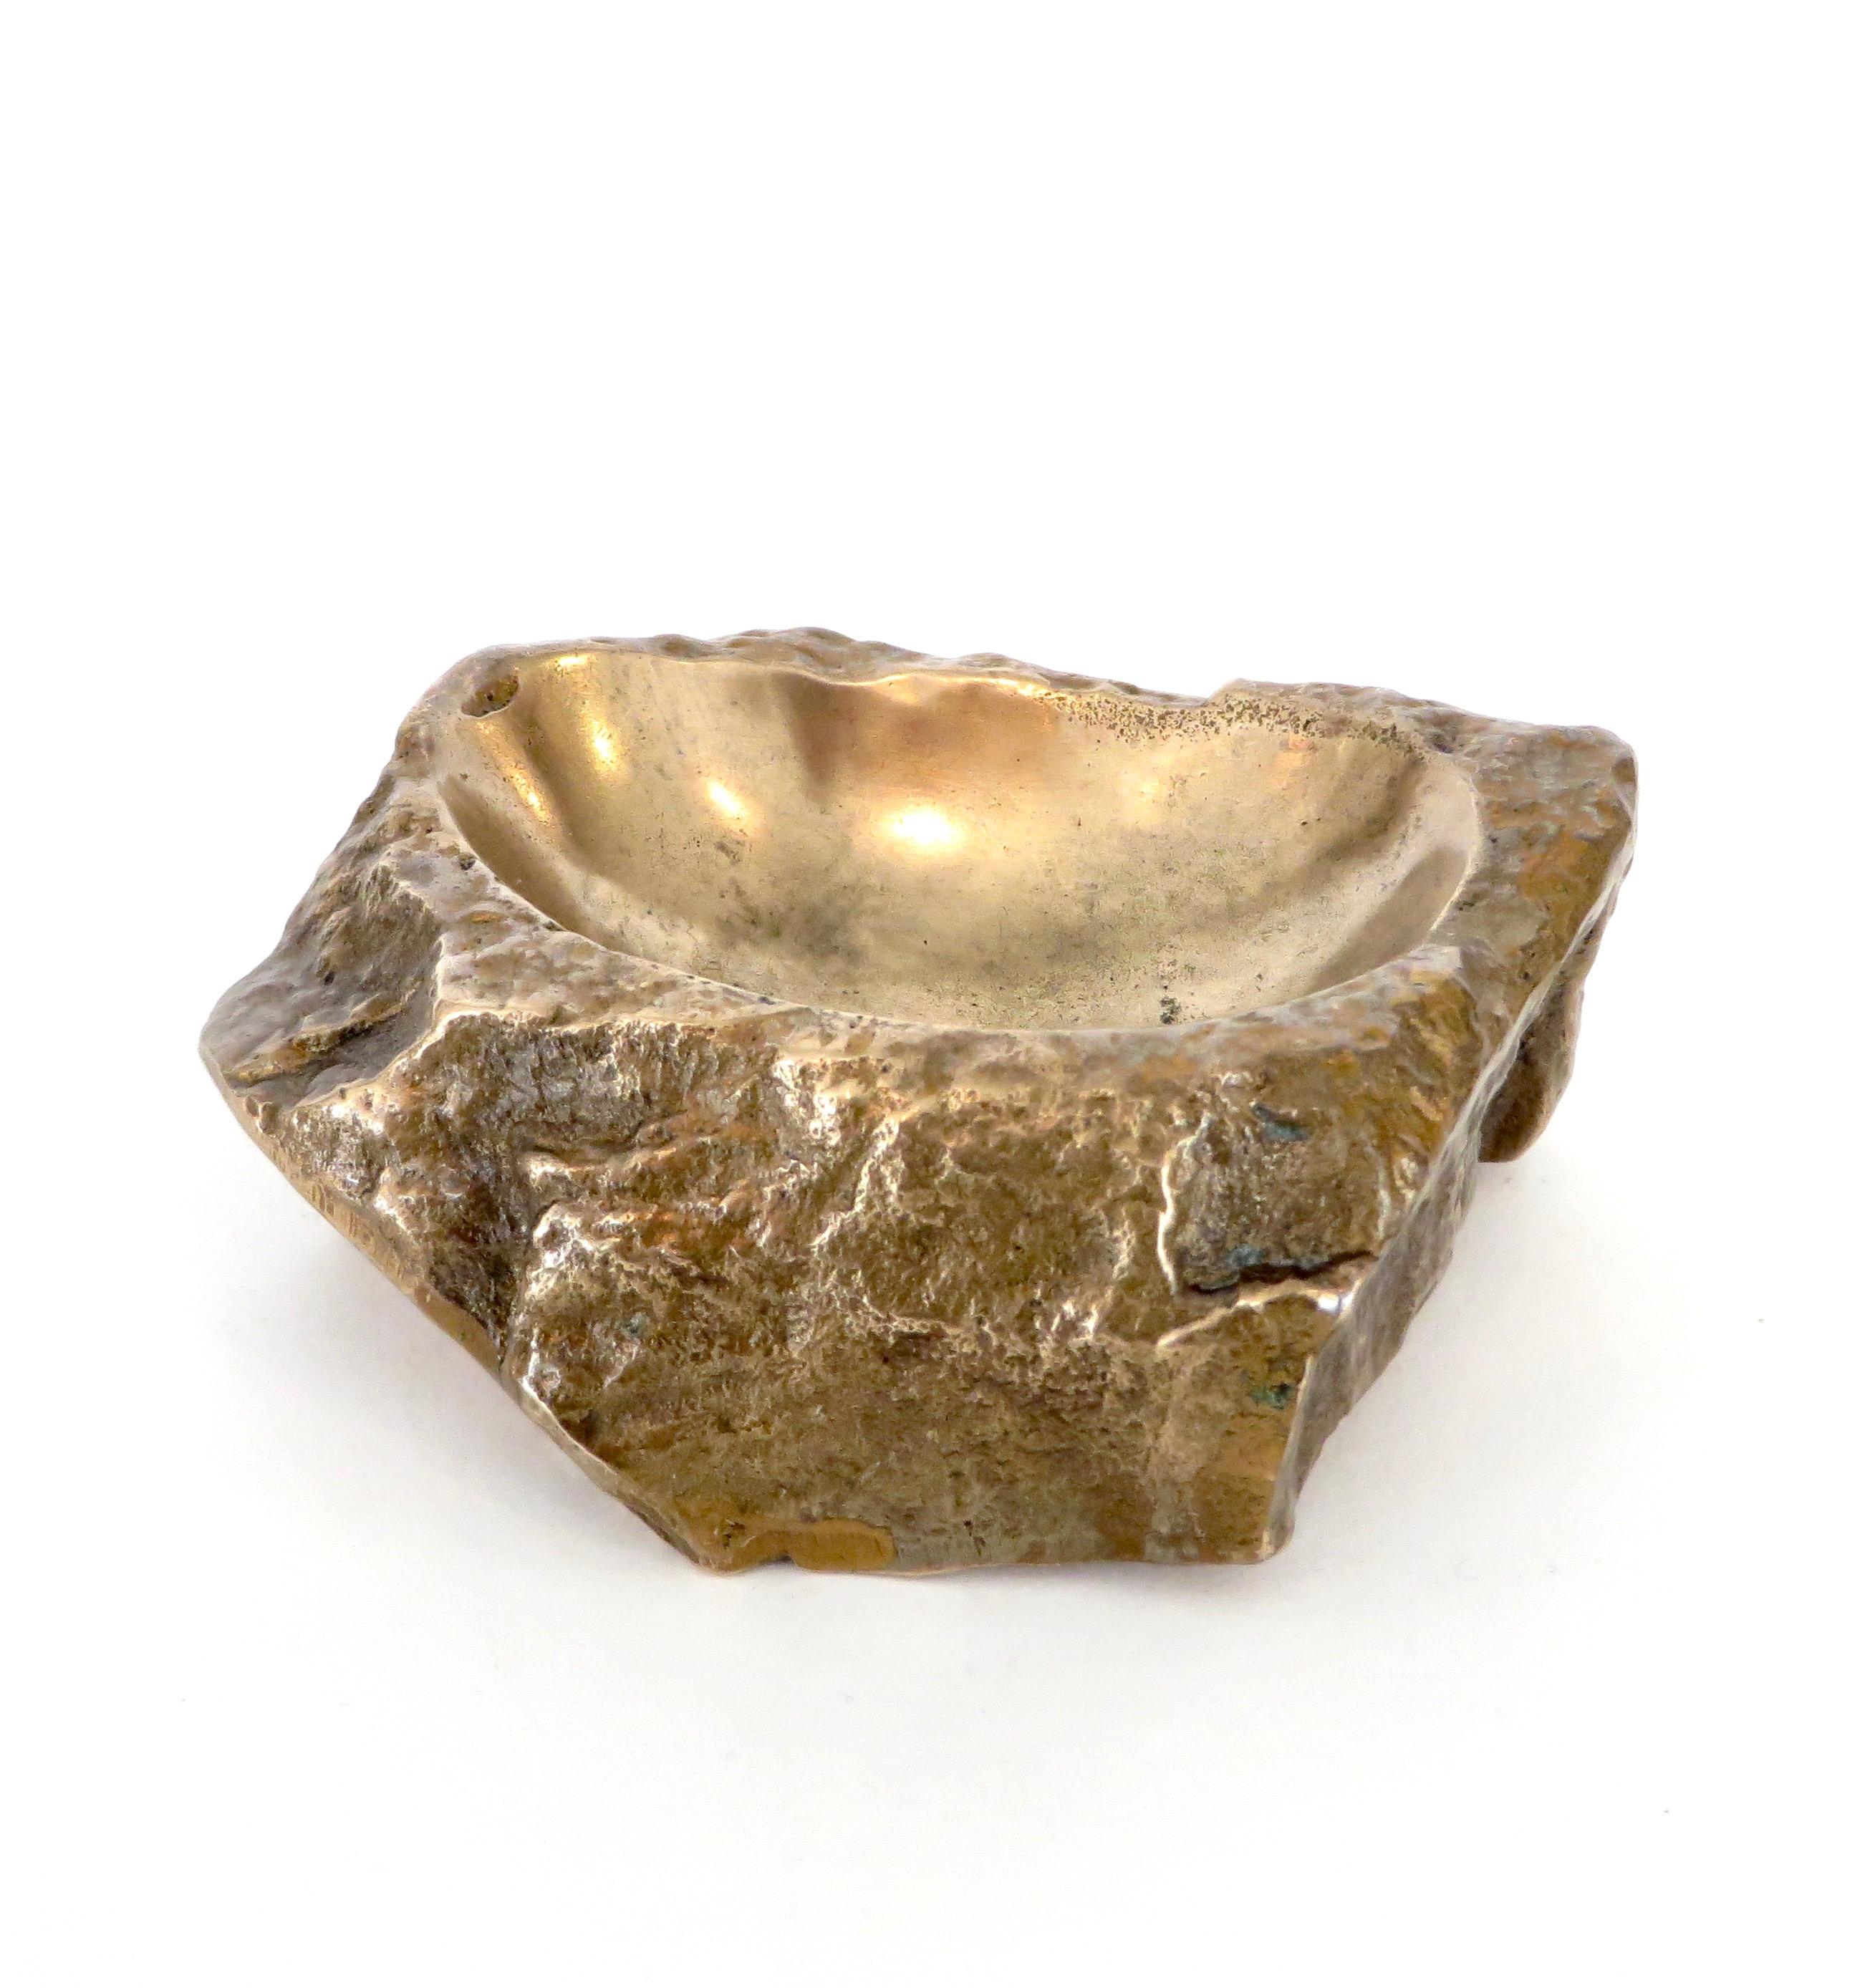 French artist Monique Gerber vintage sculptural bronze abstract rock form vide poche or ashtray. Art du bronze.
Patina is beautiful and shows its age.
These bronze objects were often used as ashtrays and this one has slight evidence of that usage.